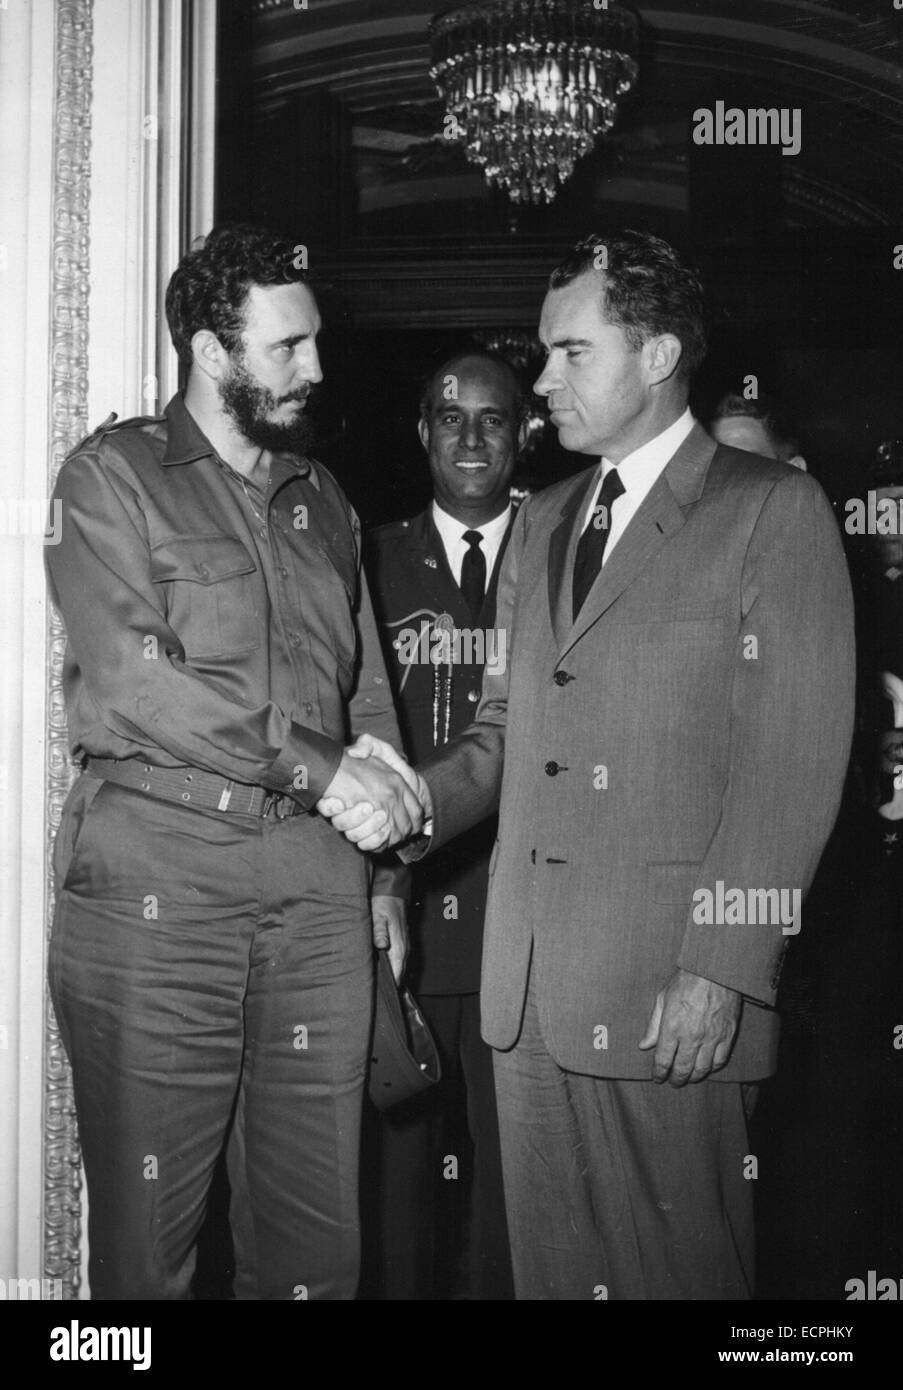 Washington, District of Columbia, USA. 21st Apr, 1959. Cuban revolutionary leader who led his country from 1959 until 2008, FIDEL CASTRO transformed Cuba into the first communist state in the Western Hemisphere. Although the US has tried hard to get rid of him, President Castro outlasted no fewer than nine American presidents since he took power in 1959. PICTURED: Castro shaking hands with then Vice President RICHARD NIXON. © KEYSTONE Pictures USA/ZUMAPRESS.com/Alamy Live News Stock Photo